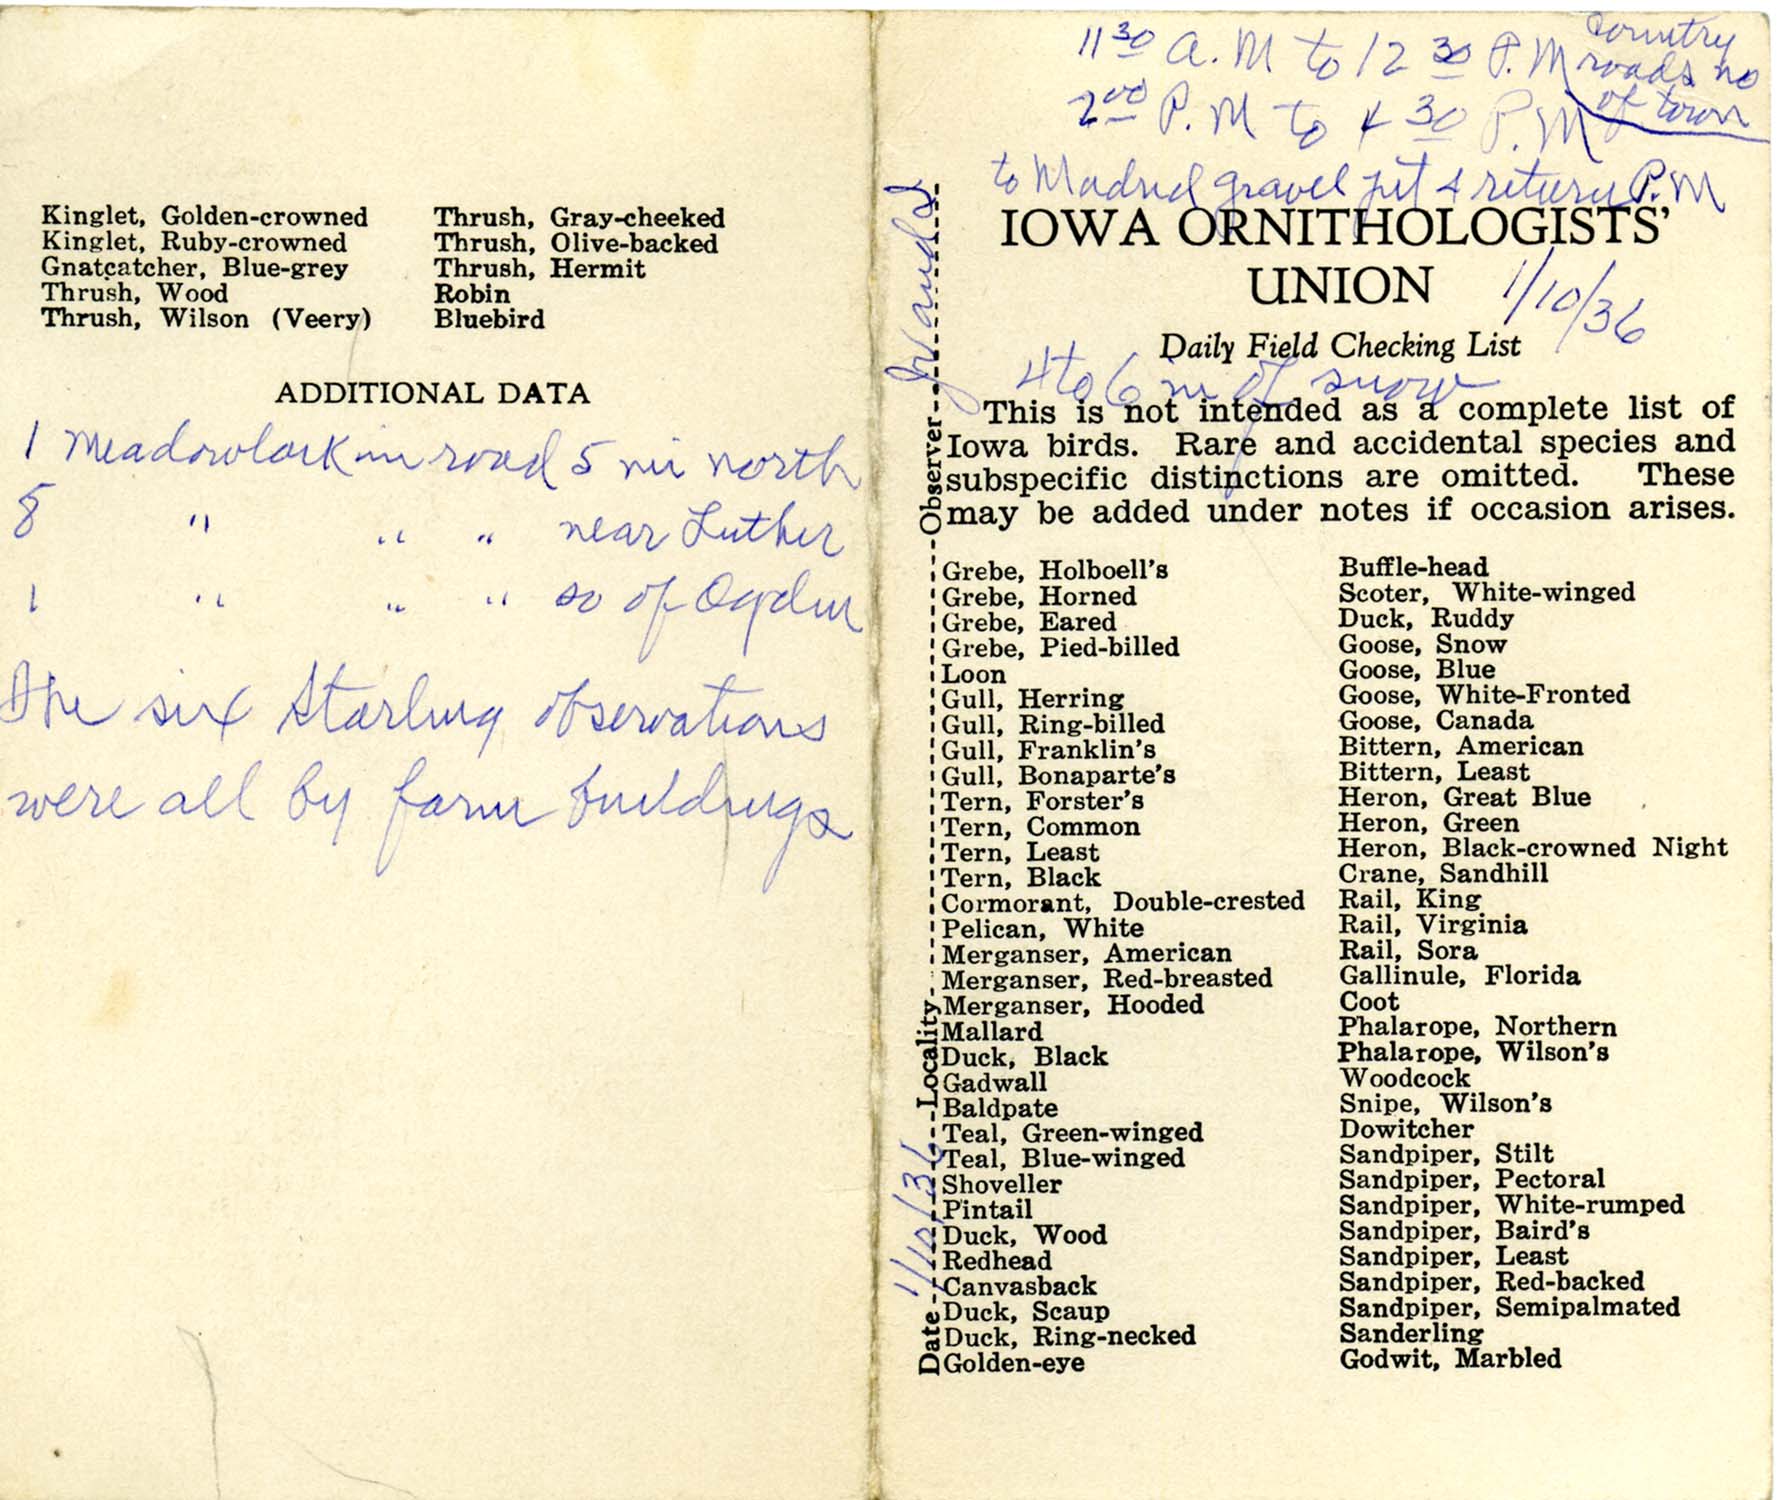 Daily field checking list by Walter Rosene, January 10, 1936